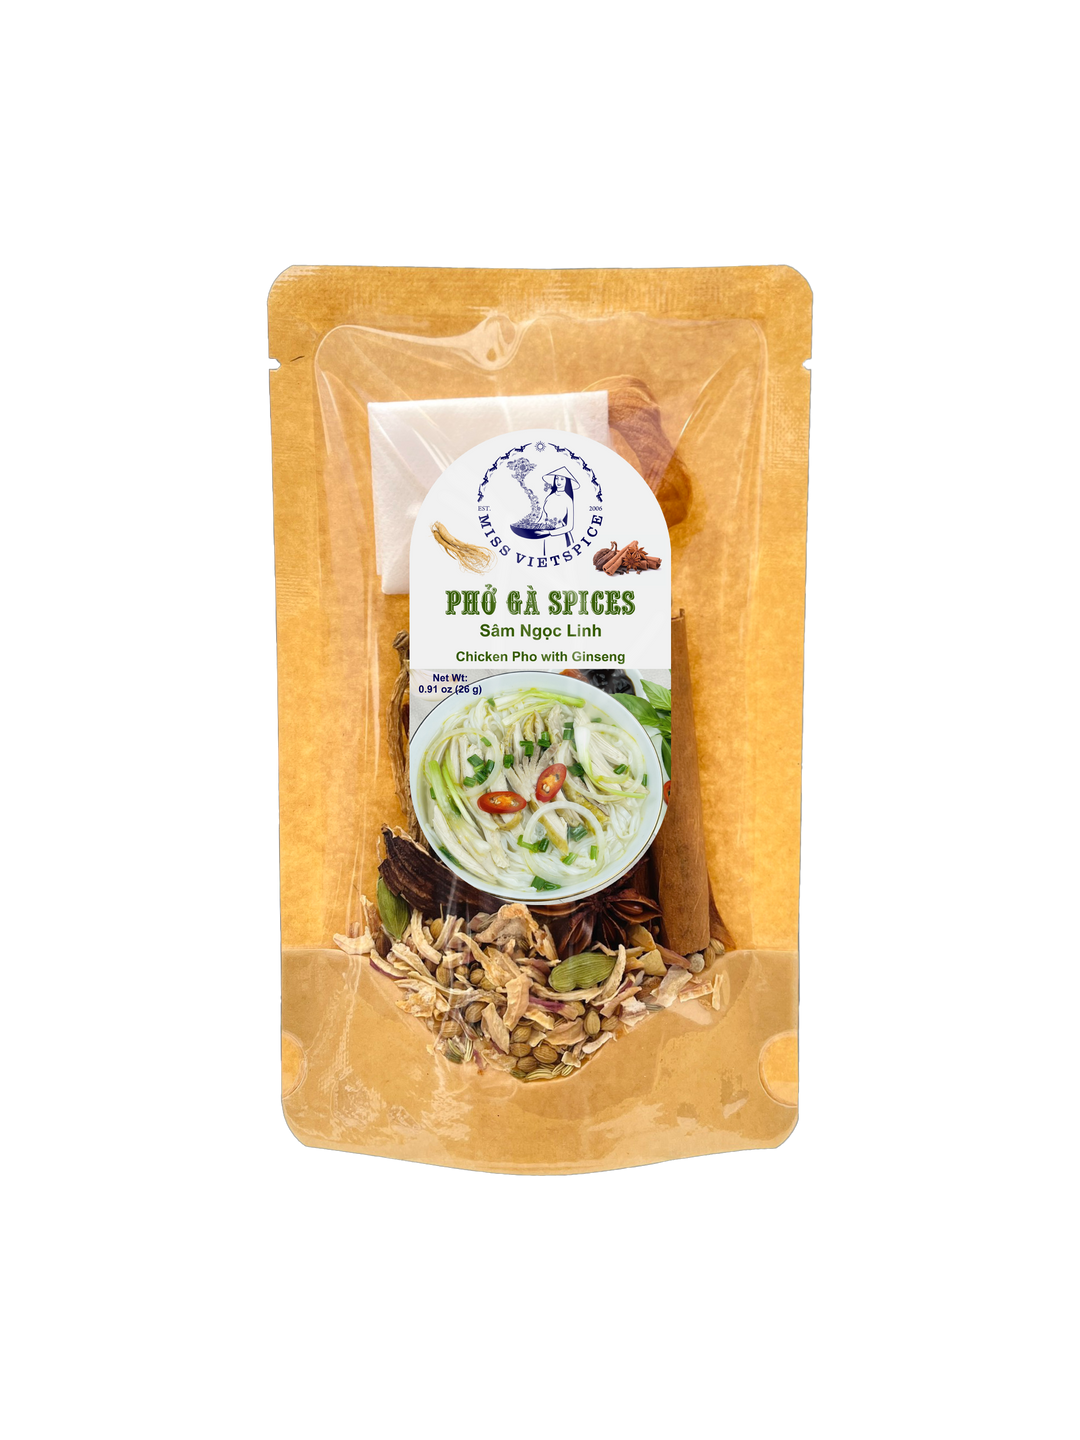 MISS VIETSPICE - 0.91 Oz - 26gr, Pack 3 of Chicken Noodles Spice with Gingseng